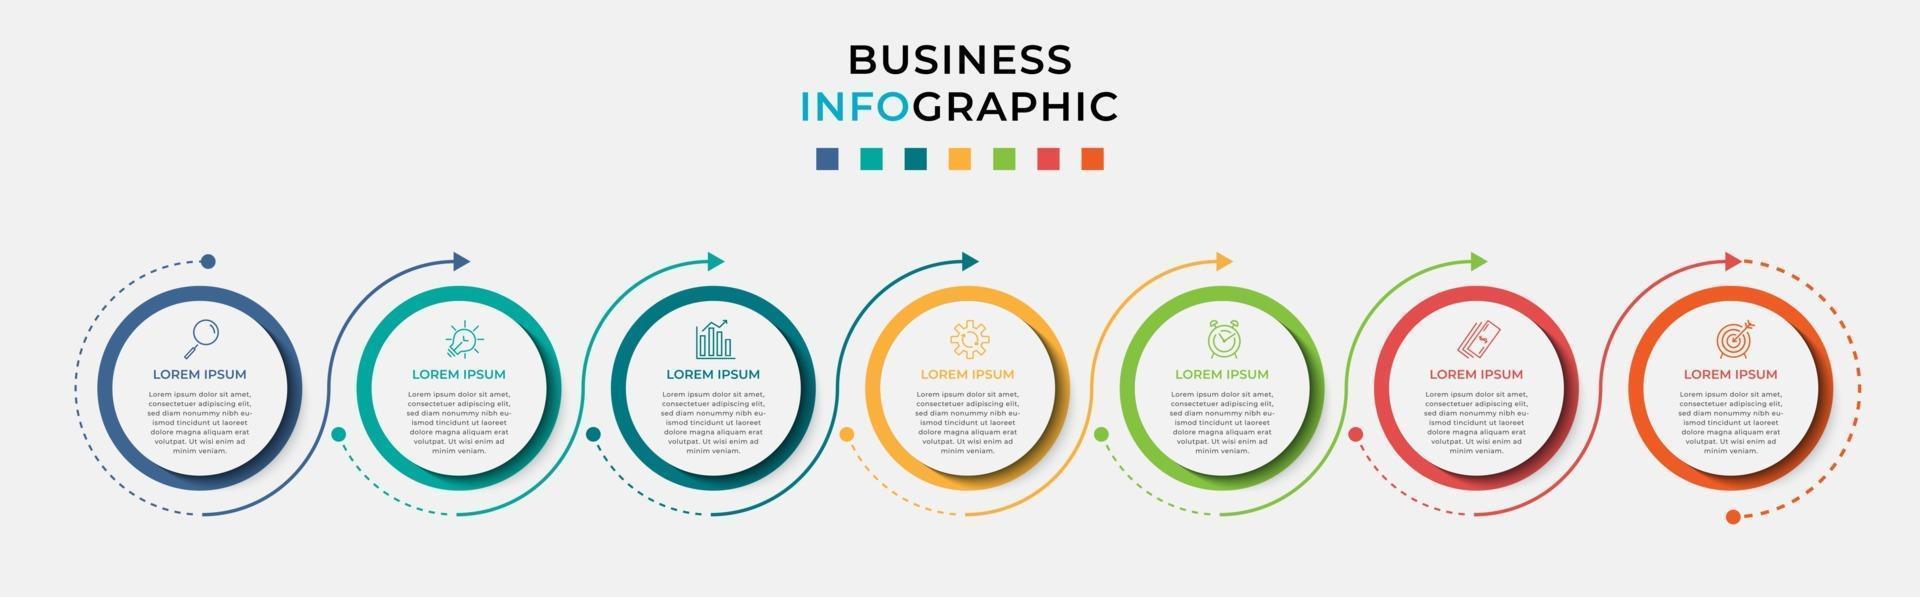 Infographic design business template with icons and 7 options or steps vector